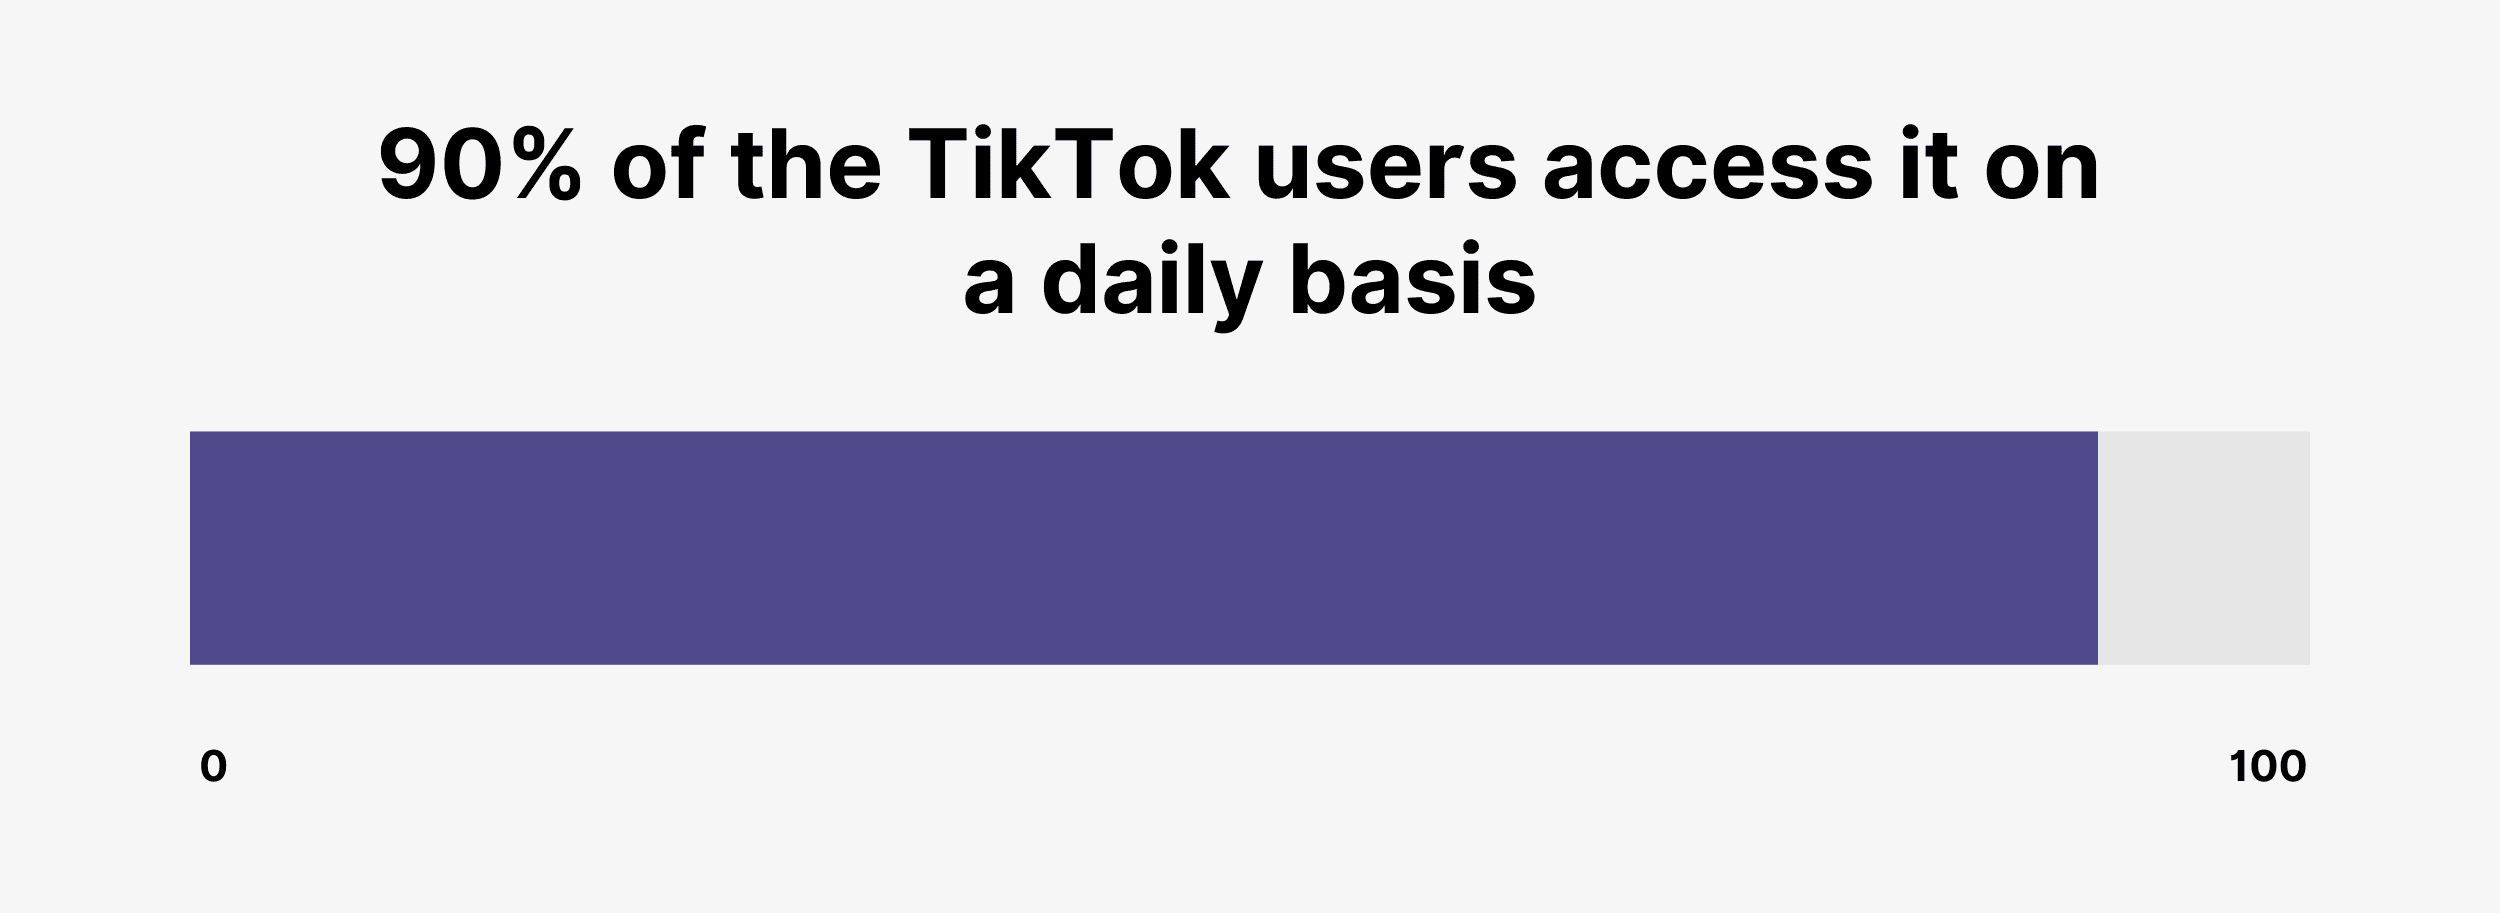 90% of the TikTok users access it on a daily basis